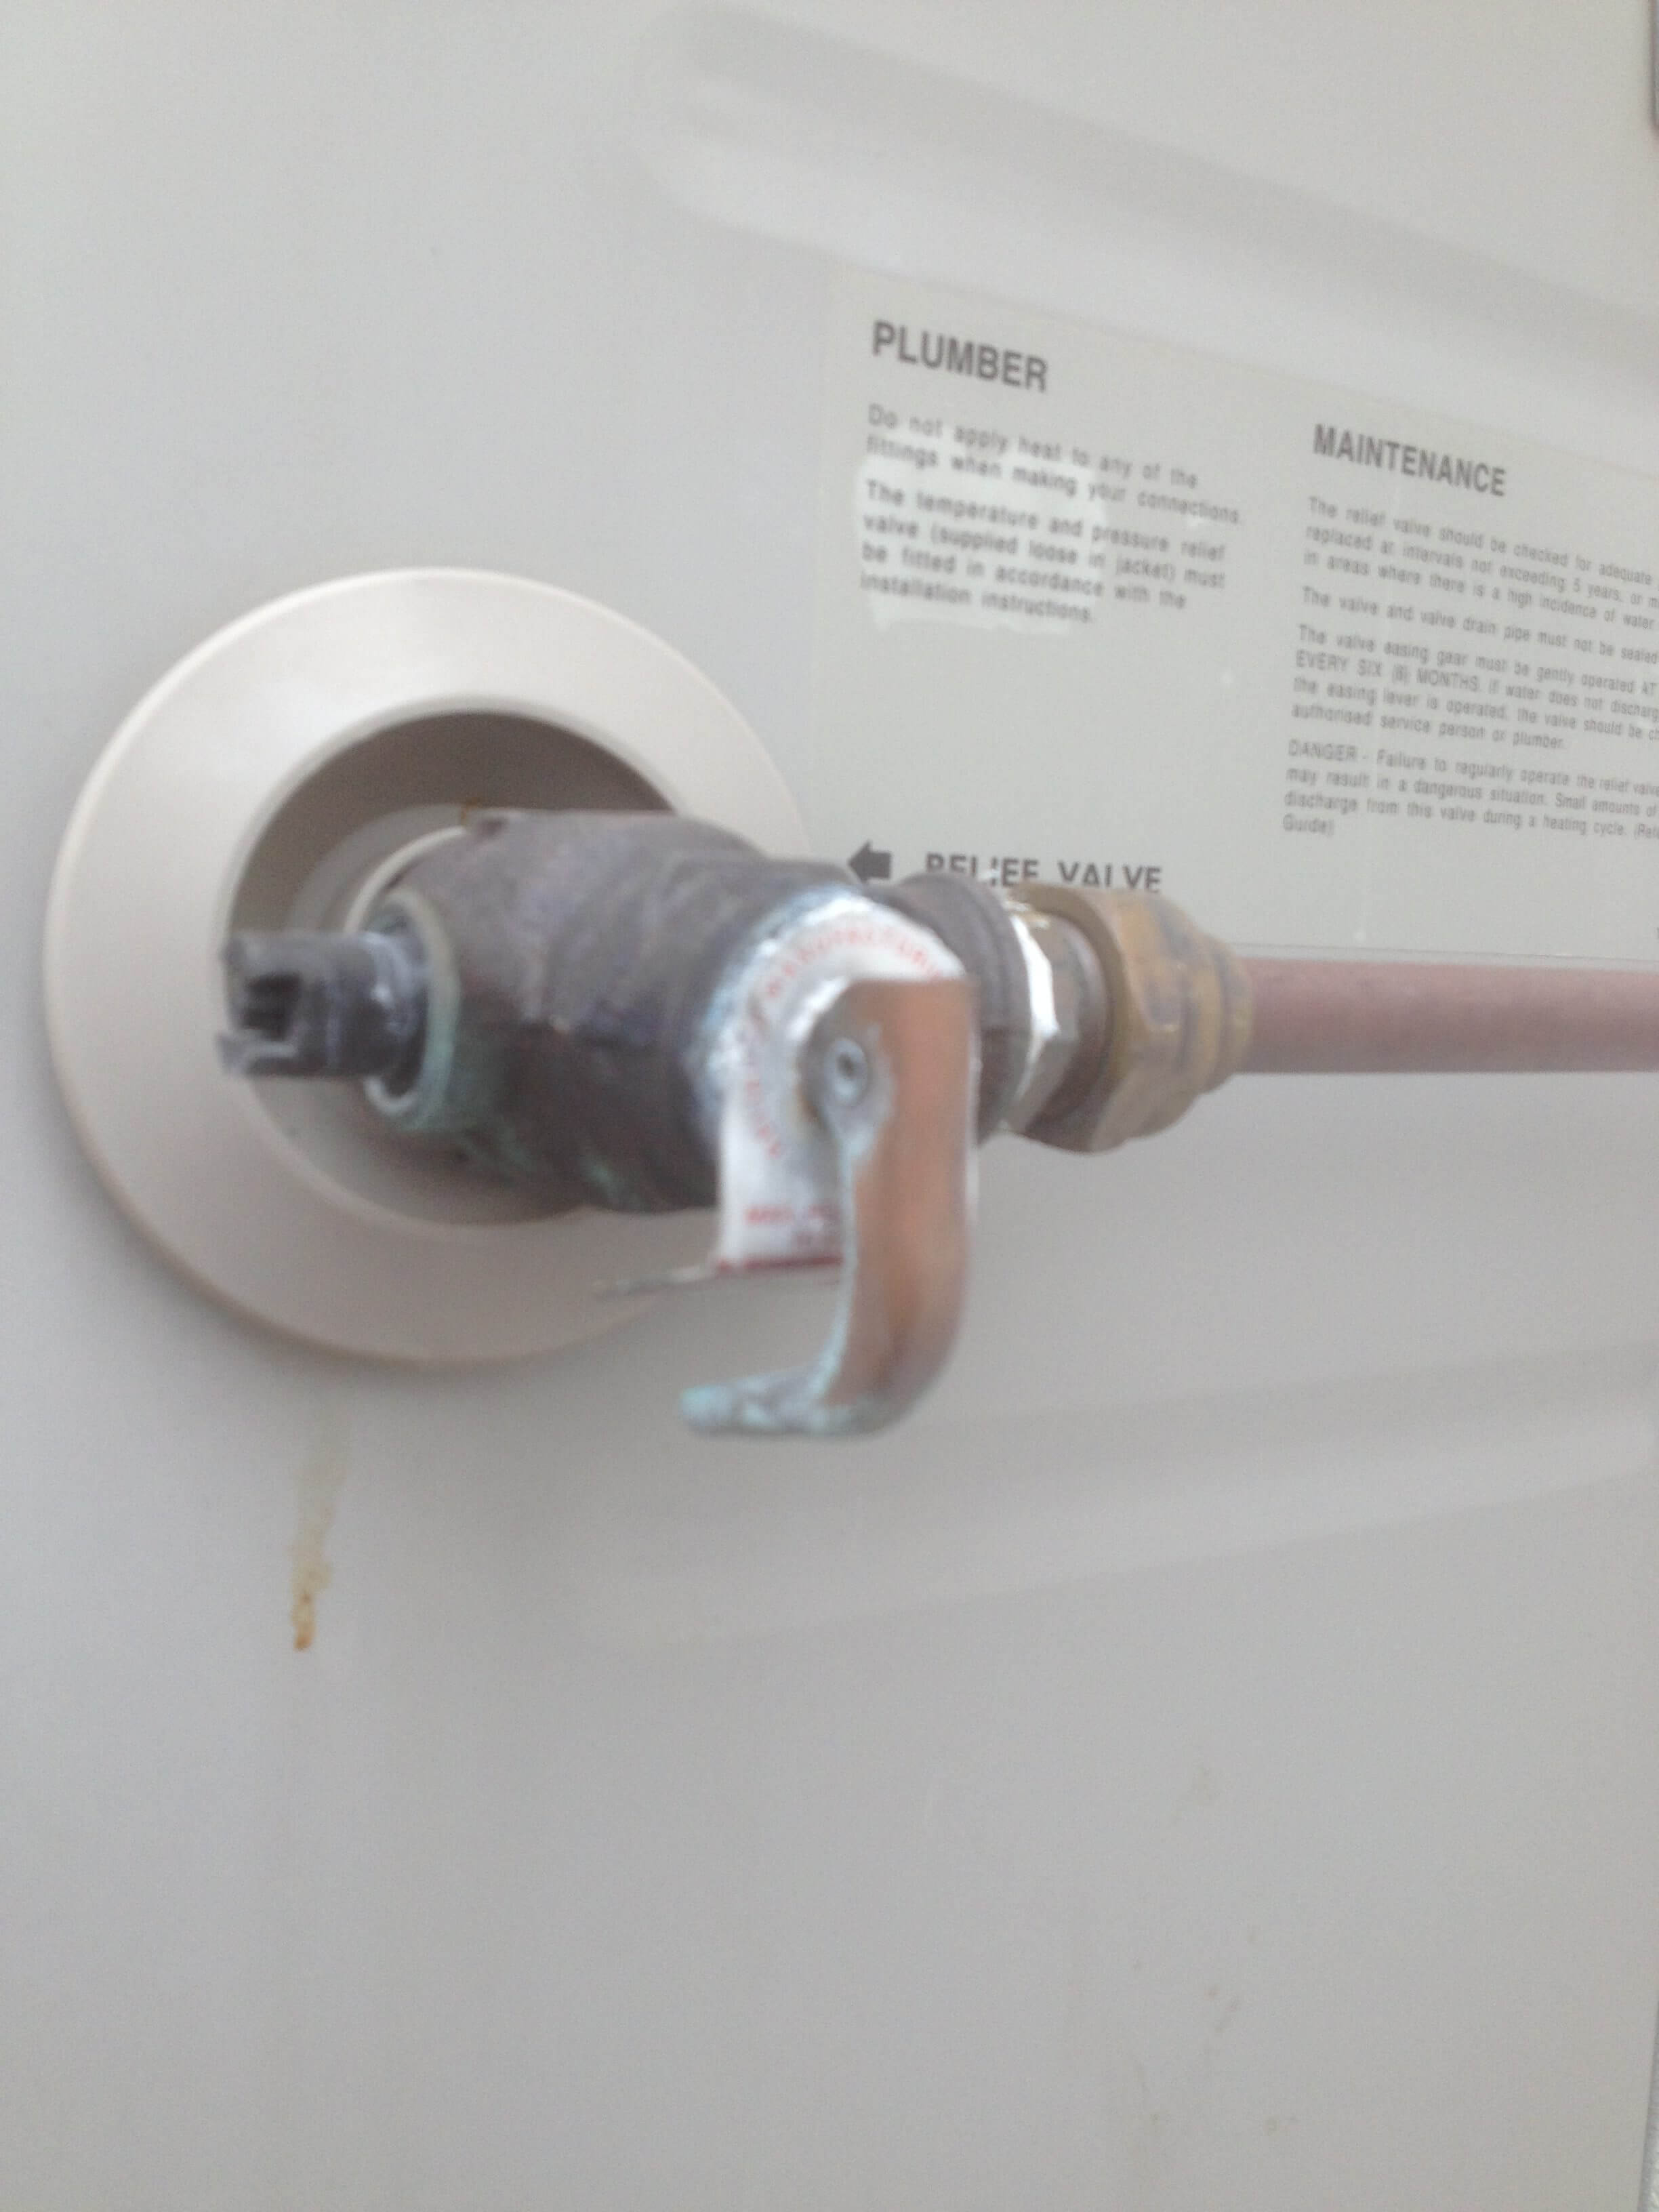 Everyday Plumbers Residential Hotwater Services - Servicing Relief Valve Hotwater